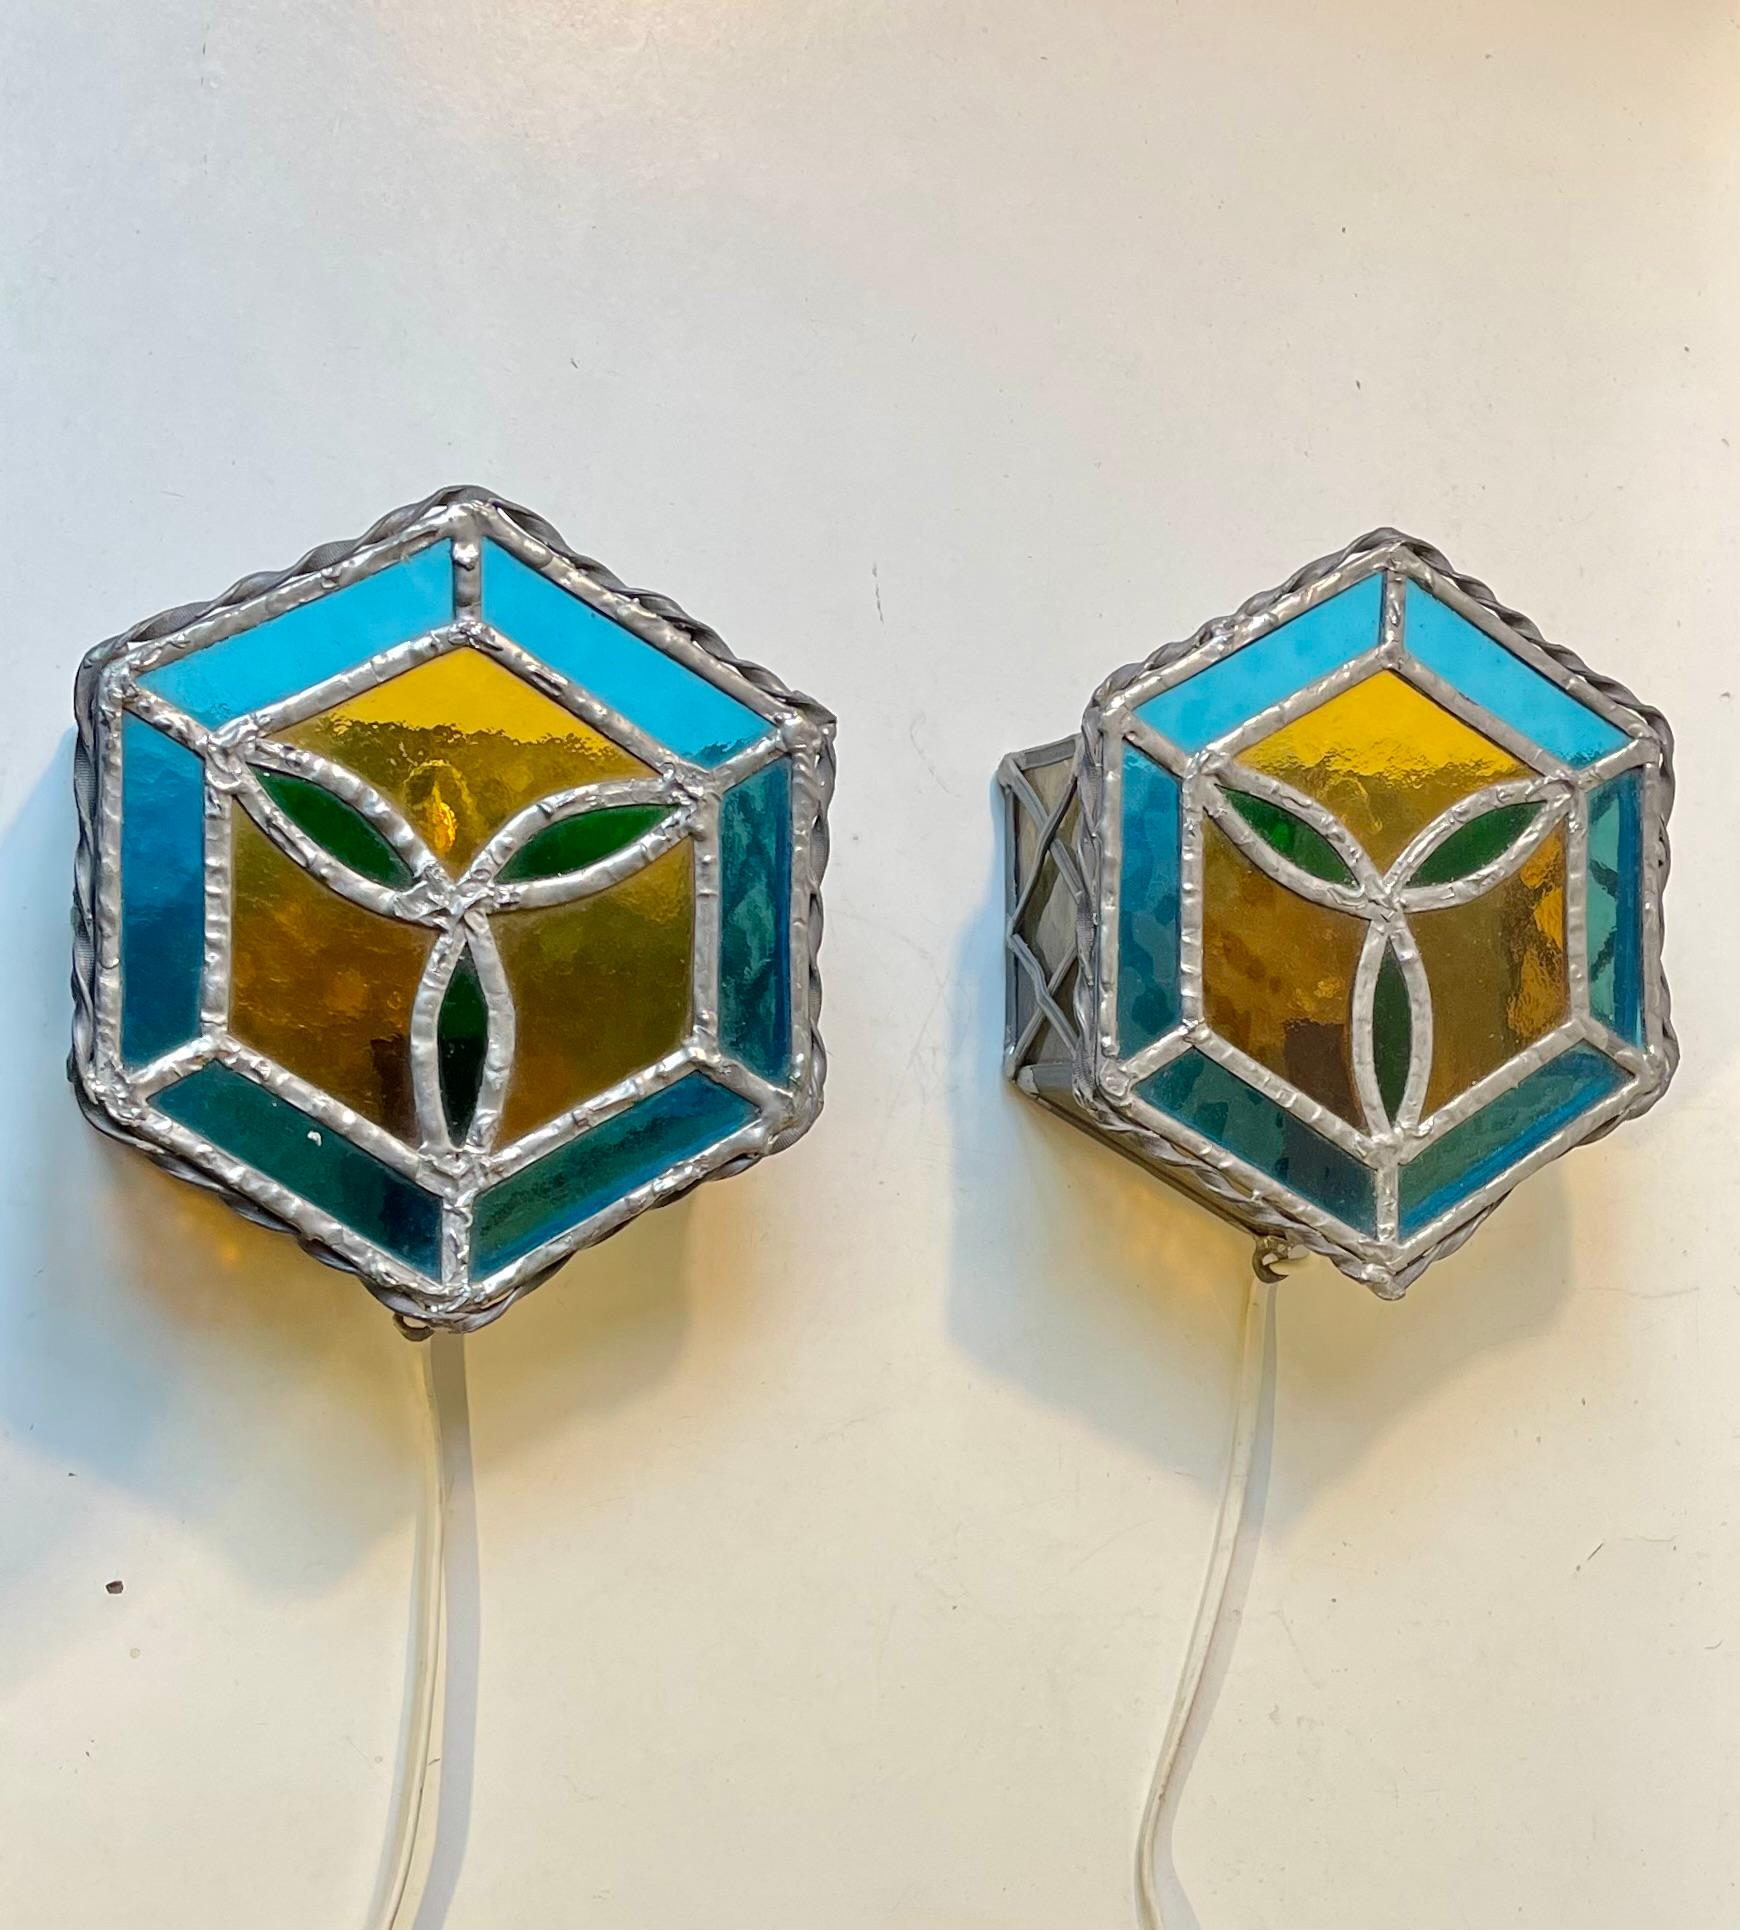 A pair of hexagonal stained glass wall lamps with green, blue and yellow panelling. Gothic revival in style and handmade in Scandinavia during the 1970s. They are installed with E14 28 watts sockets/bulbs. Measurements: 20x18x7,5 cm. Both in working